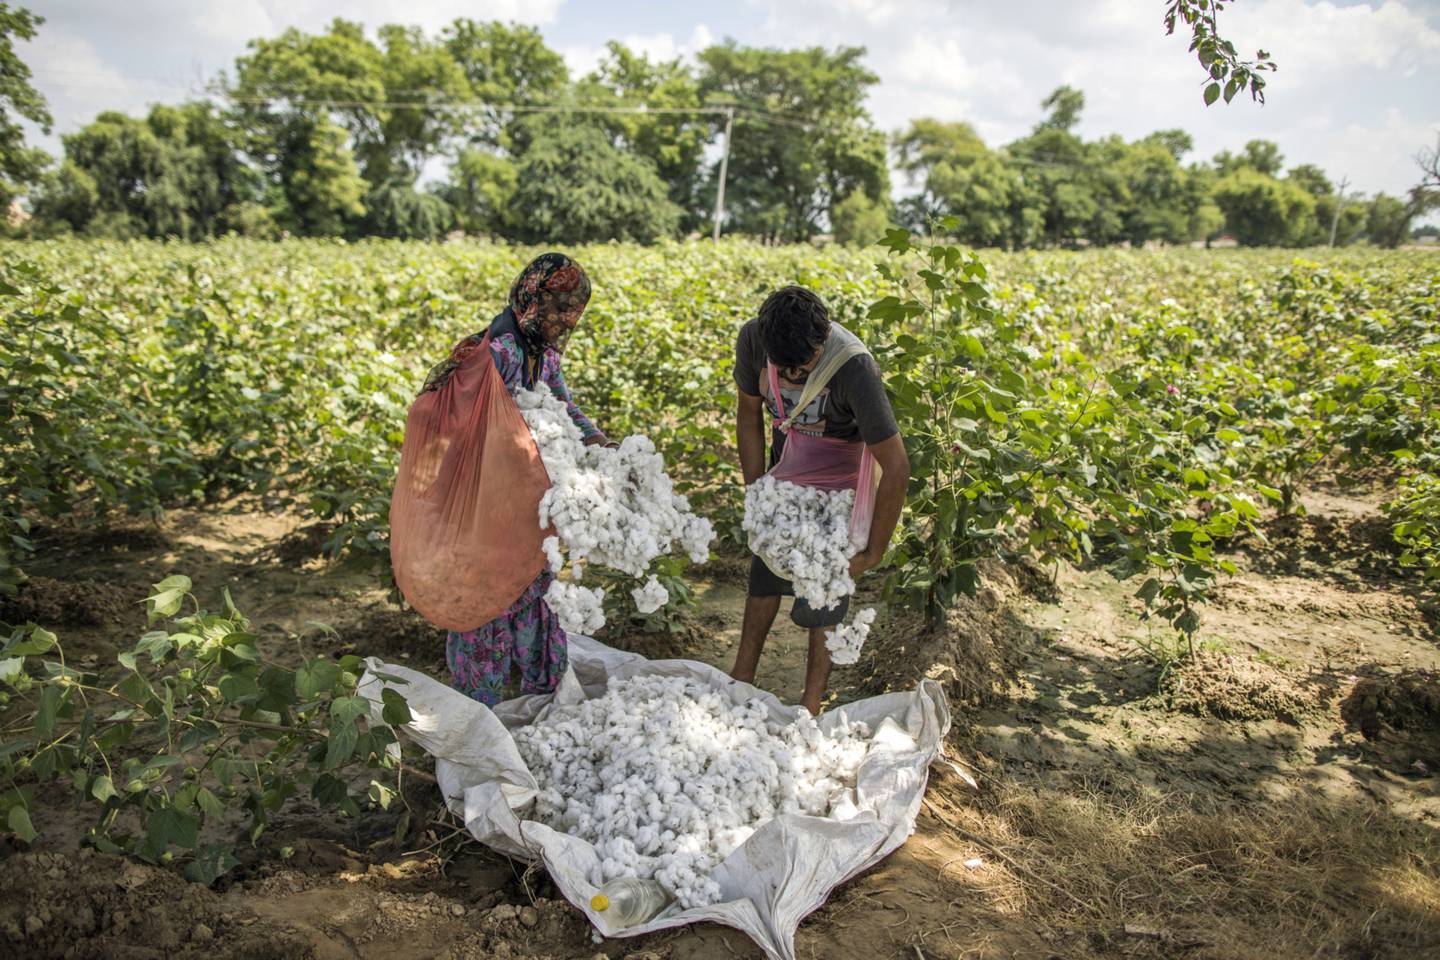 Farmers empty bags of hand-picked cotton bolls in Haryana, India. Labor practices are hard to police in the remote fields where much of it is grown. Photographer: Prashanth Vishwanathan/Bloombergdfd